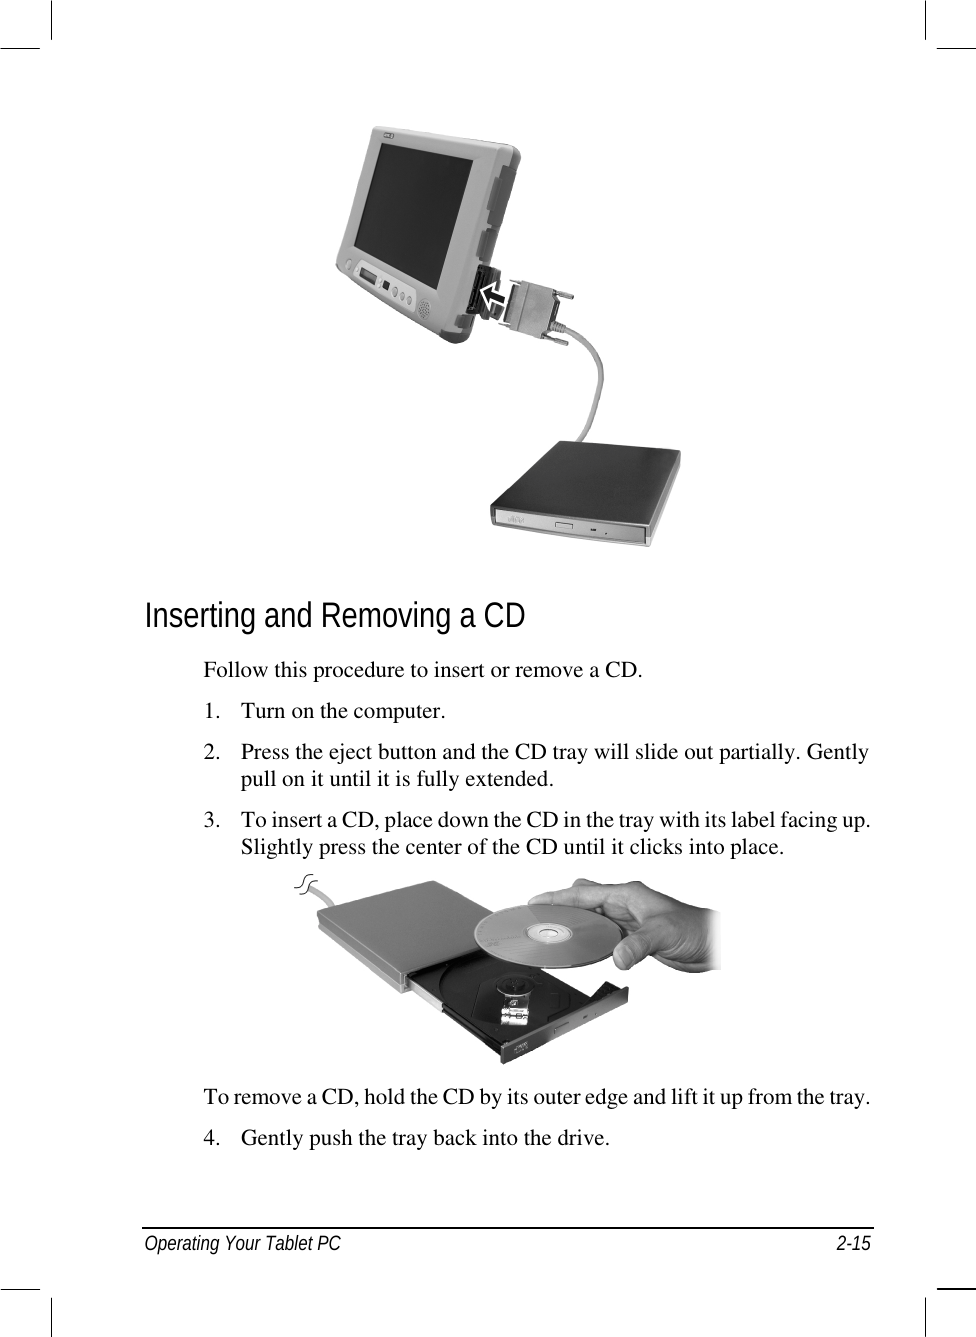  Operating Your Tablet PC  2-15   Inserting and Removing a CD Follow this procedure to insert or remove a CD. 1.  Turn on the computer. 2.  Press the eject button and the CD tray will slide out partially. Gently pull on it until it is fully extended. 3.  To insert a CD, place down the CD in the tray with its label facing up. Slightly press the center of the CD until it clicks into place.   To remove a CD, hold the CD by its outer edge and lift it up from the tray. 4.  Gently push the tray back into the drive. 